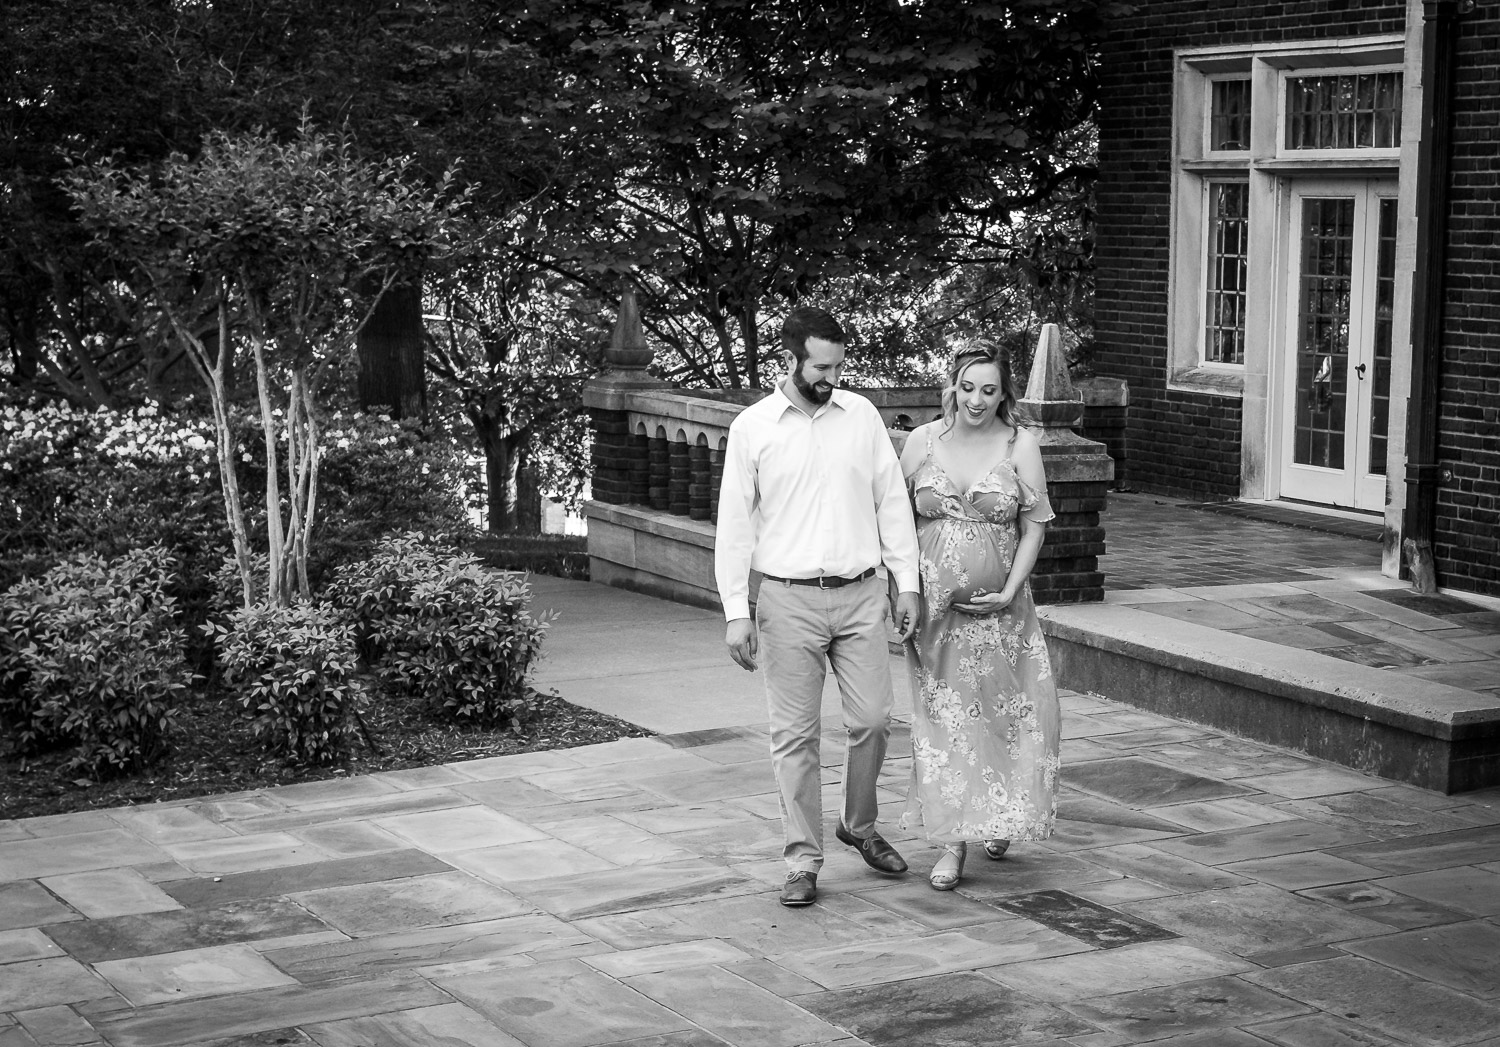 Black and white family photos. Husband and wife walking across pavement in front of an old house.